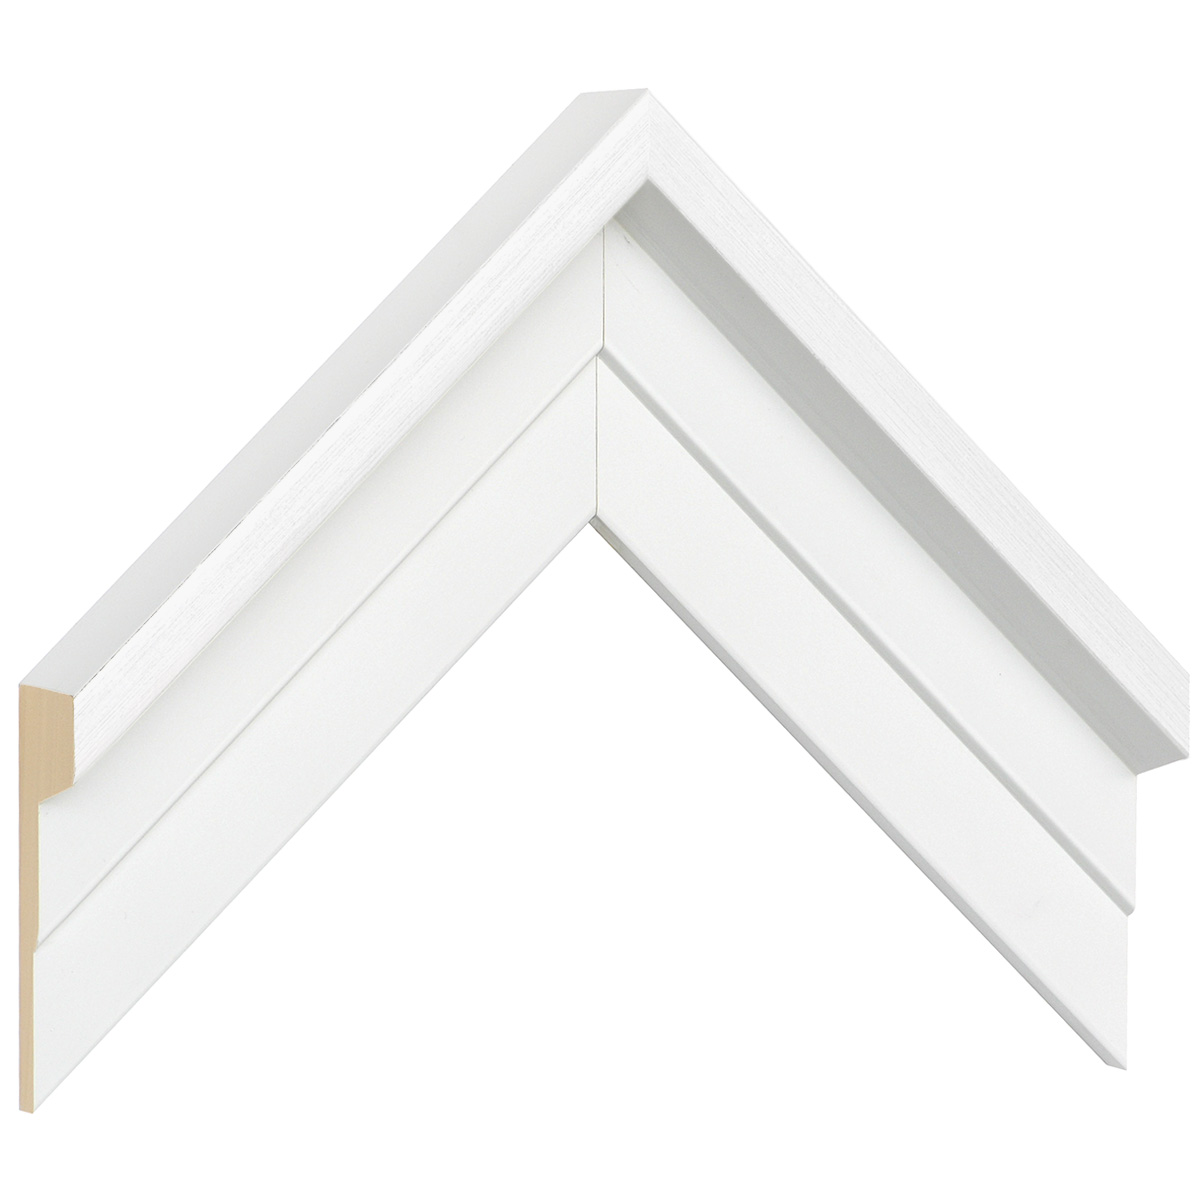 Moulding ayous jointed L shape, Width 54mm Height 36 White - Sample